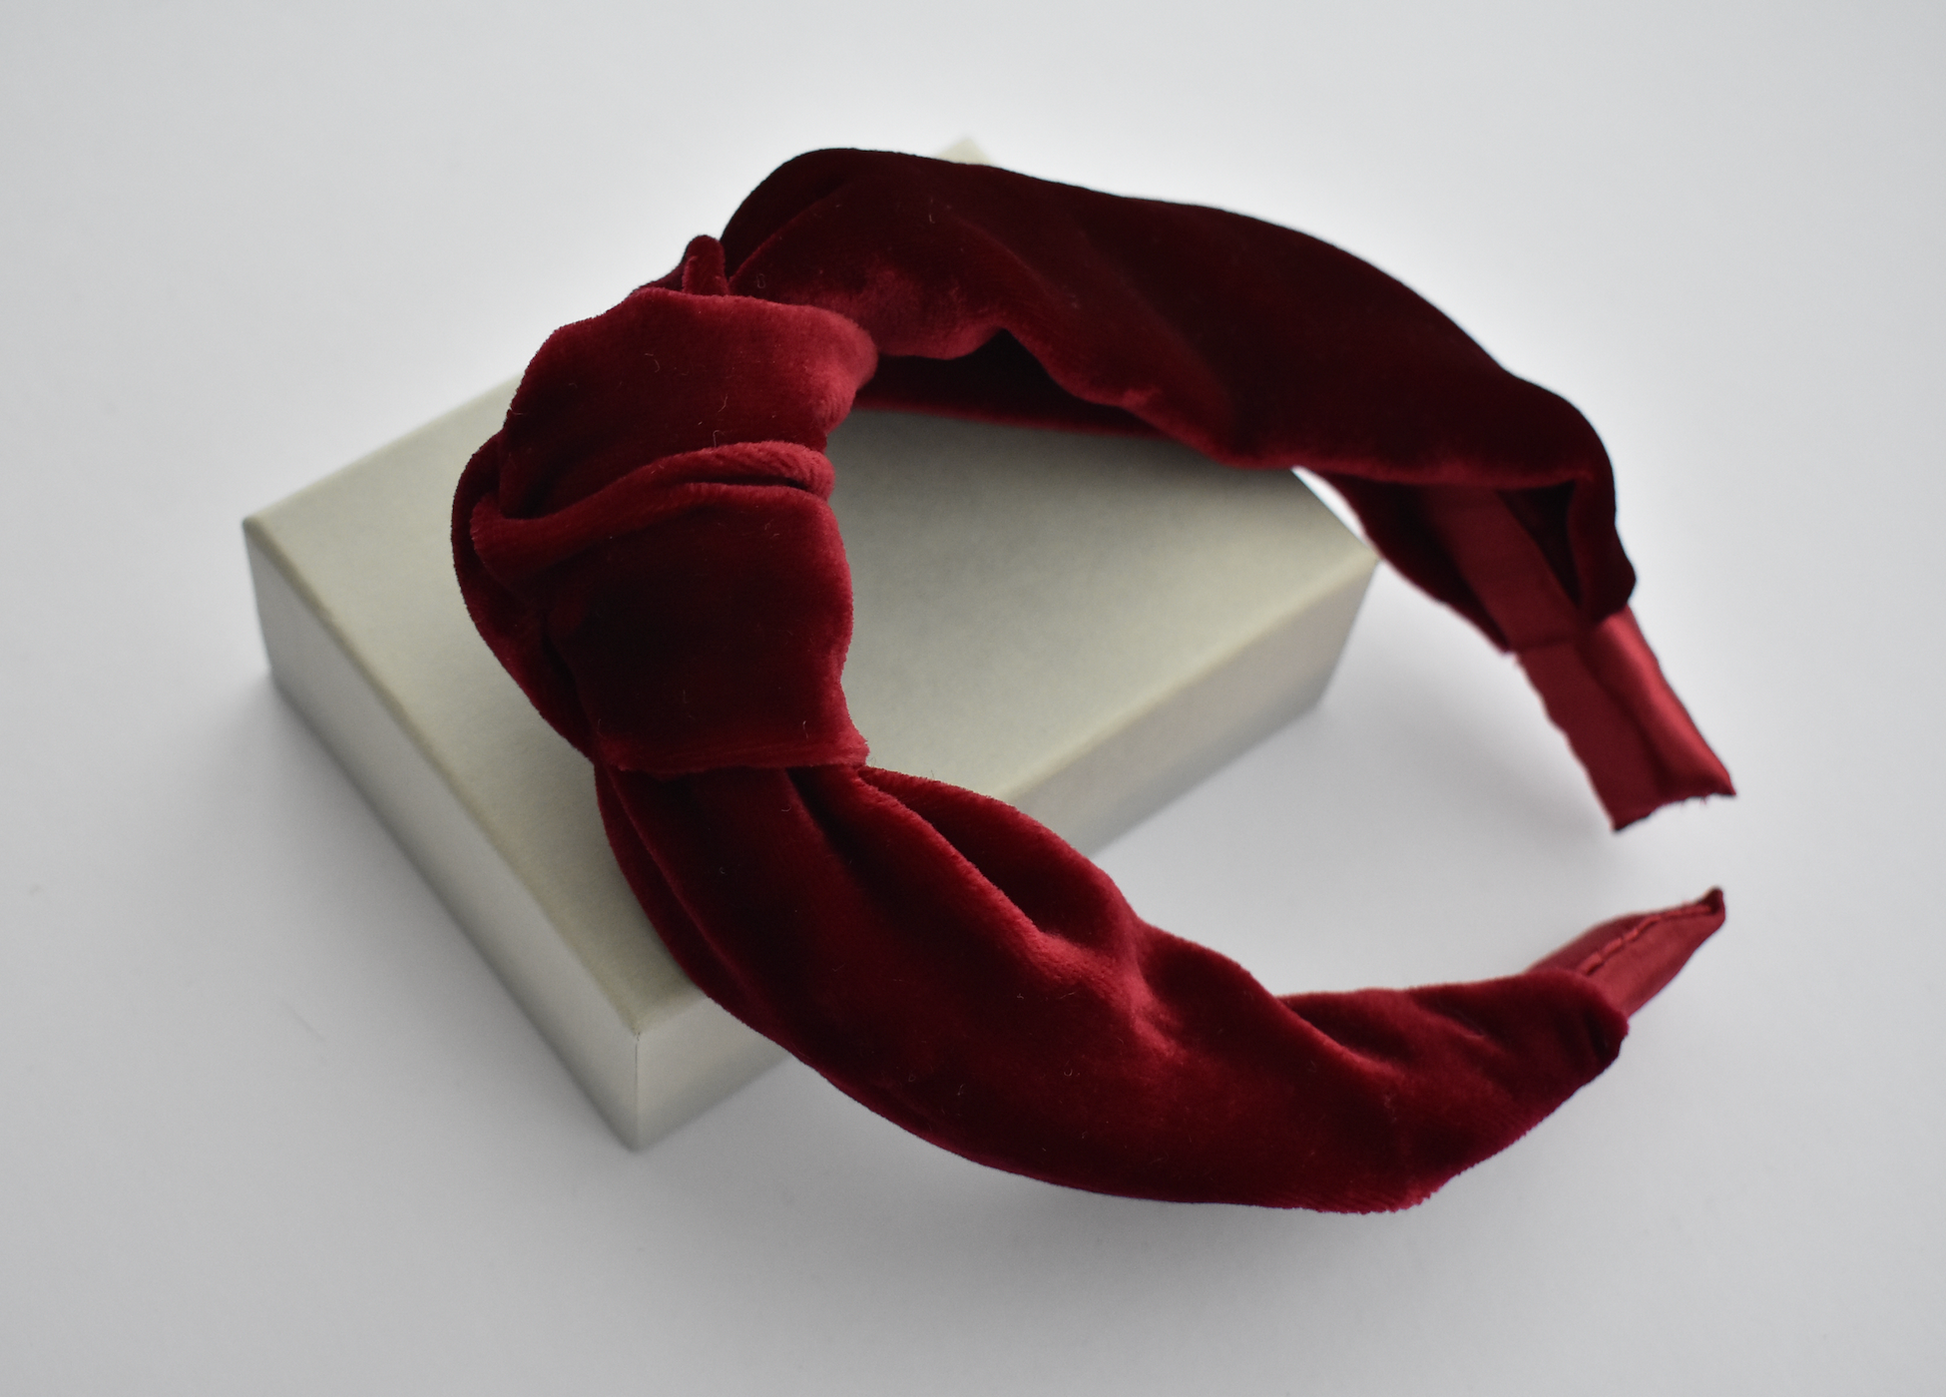 Classic Knot head band - Ruby & Ox Blood Red Velvet - Tot Knots of Brighton